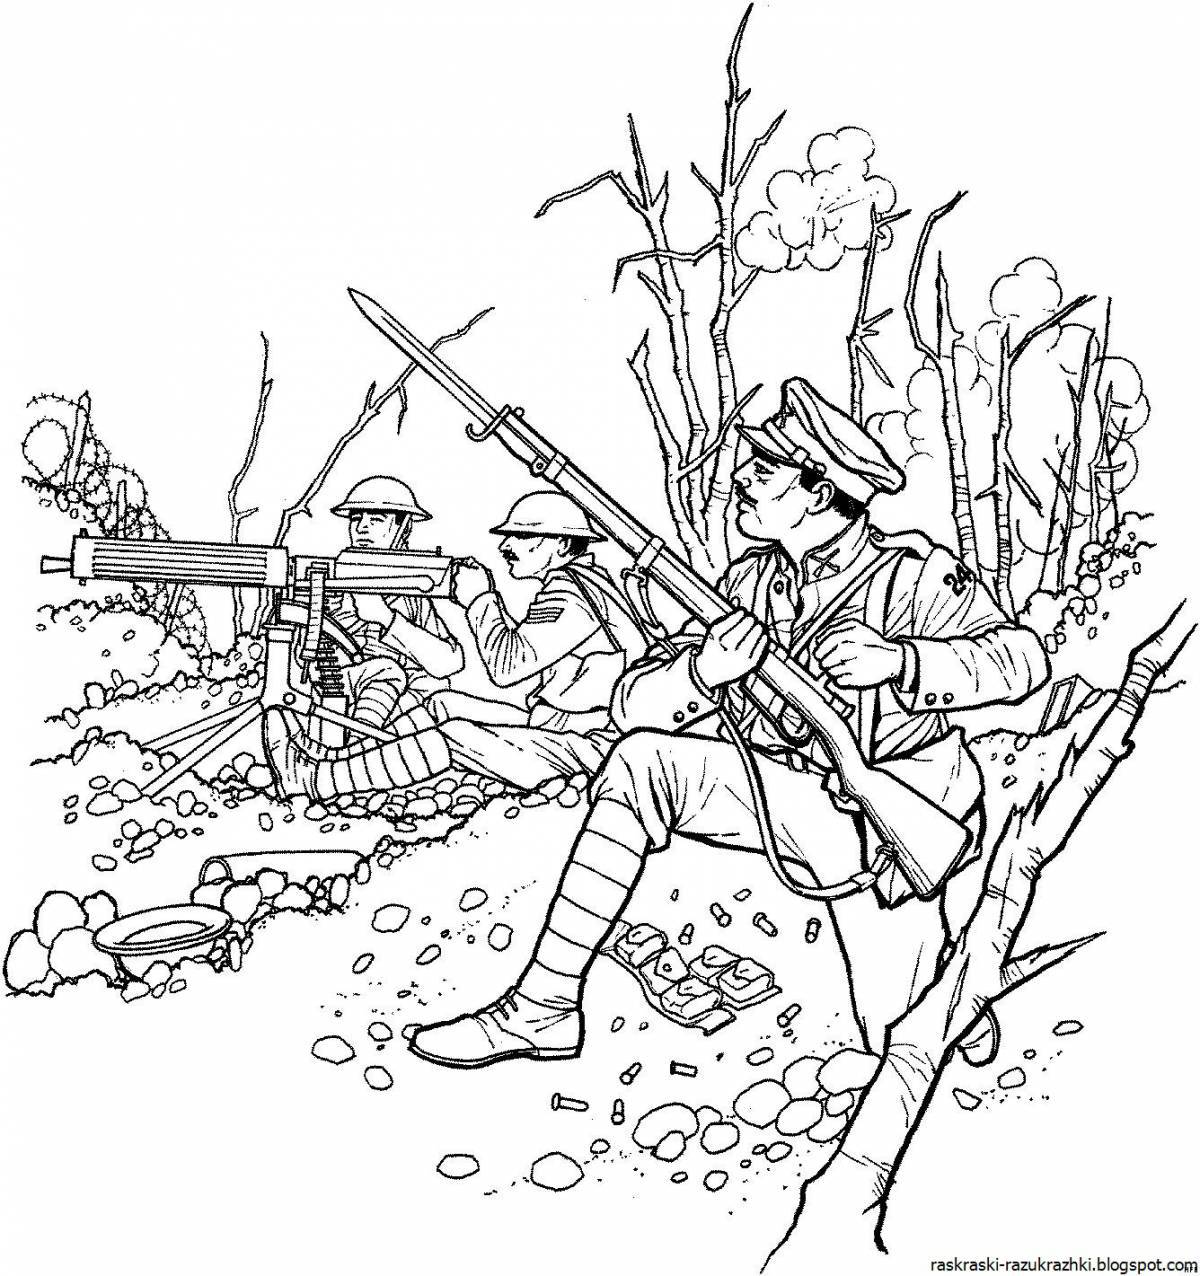 Animated military coloring book for kids